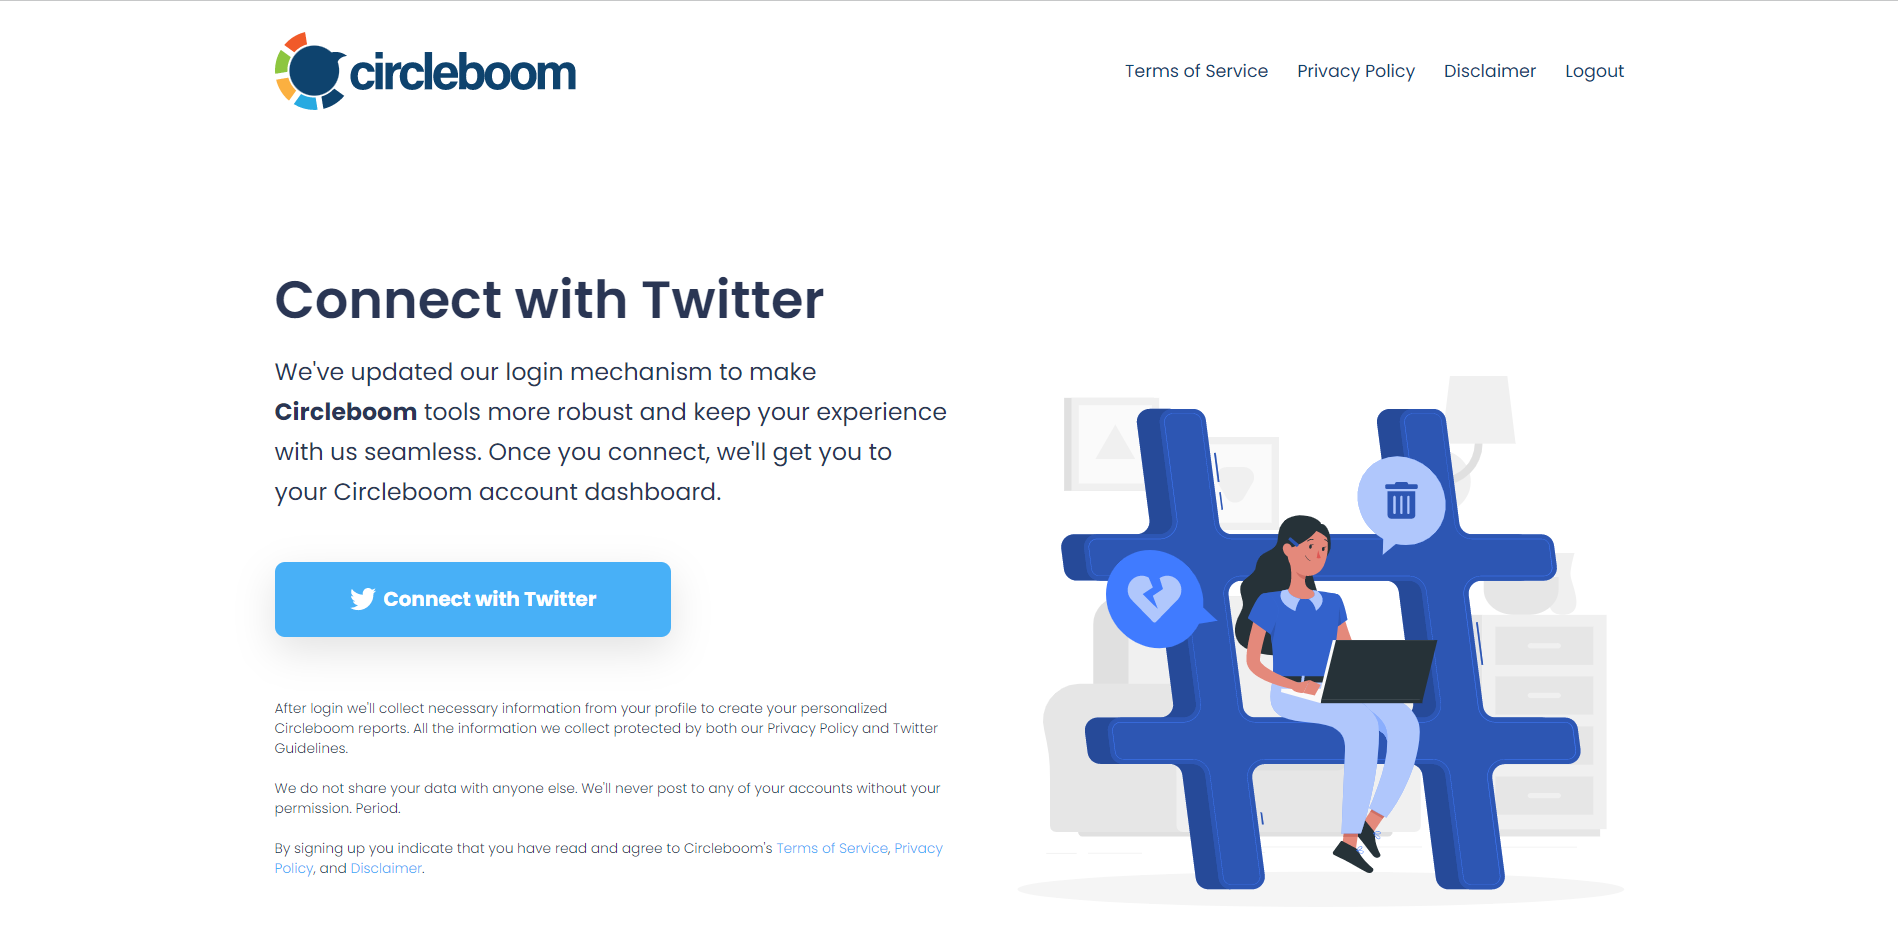 Get your Twitter unfollower stats provided by Circleboom Twitter!